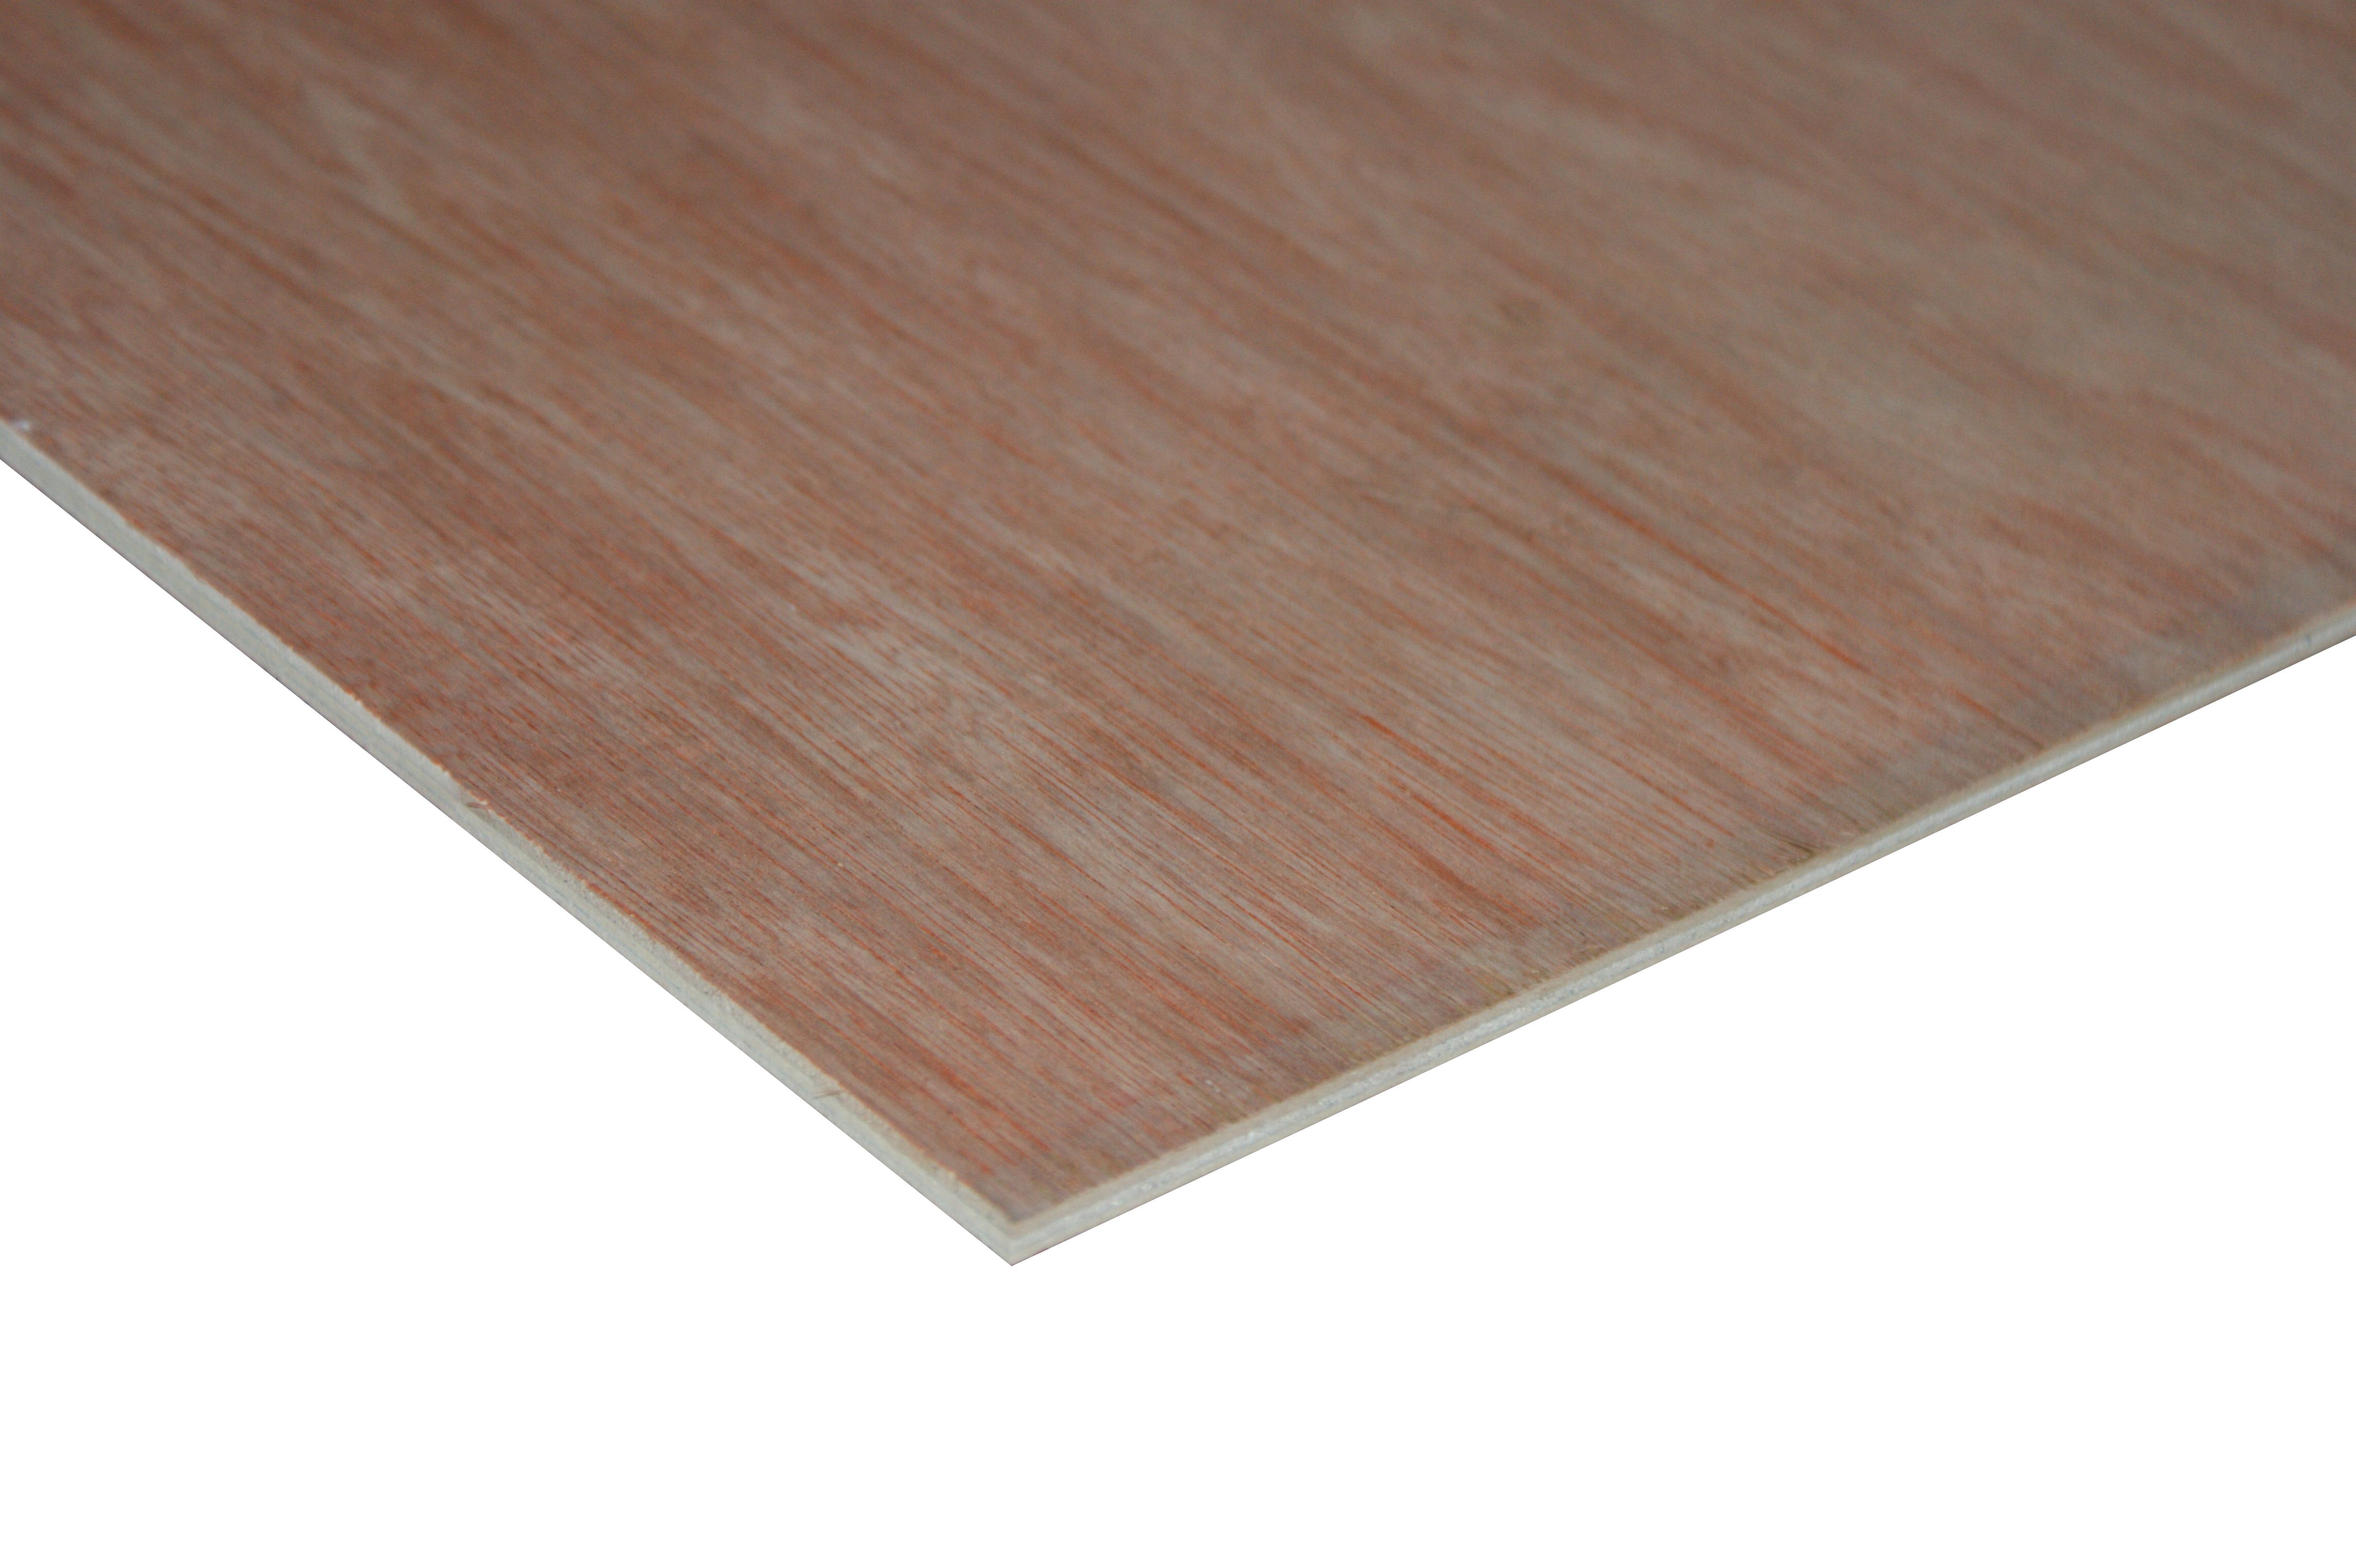 Image of Wickes Non-Structural Hardwood Plywood - 5.5 x 606 x 1220mm